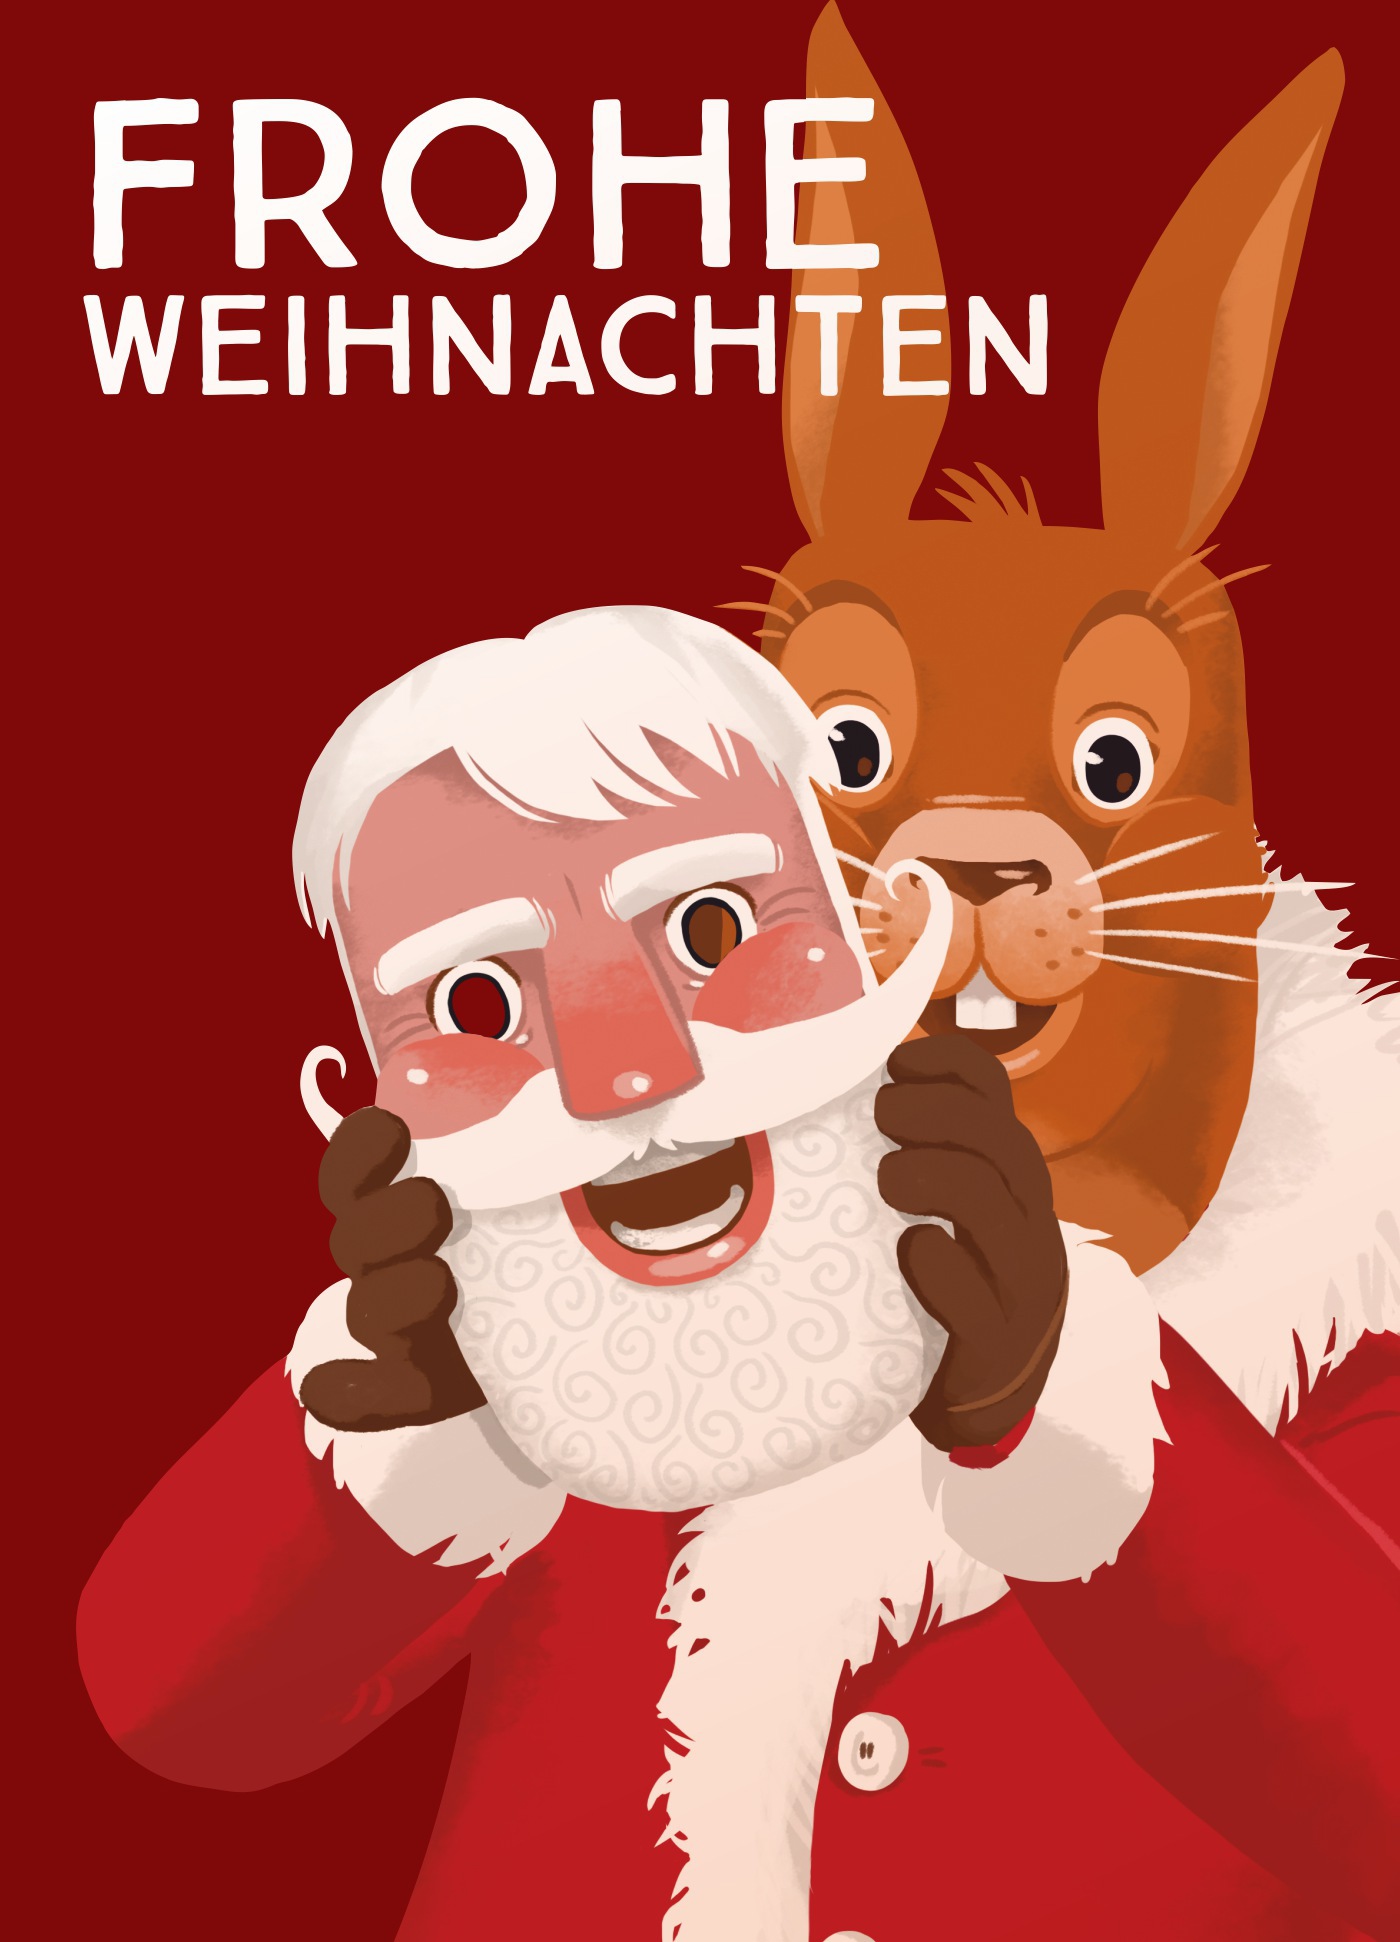 Merry Christmas Santa Claus easter bunny Christmas Weihnachten Unmasking animatiion